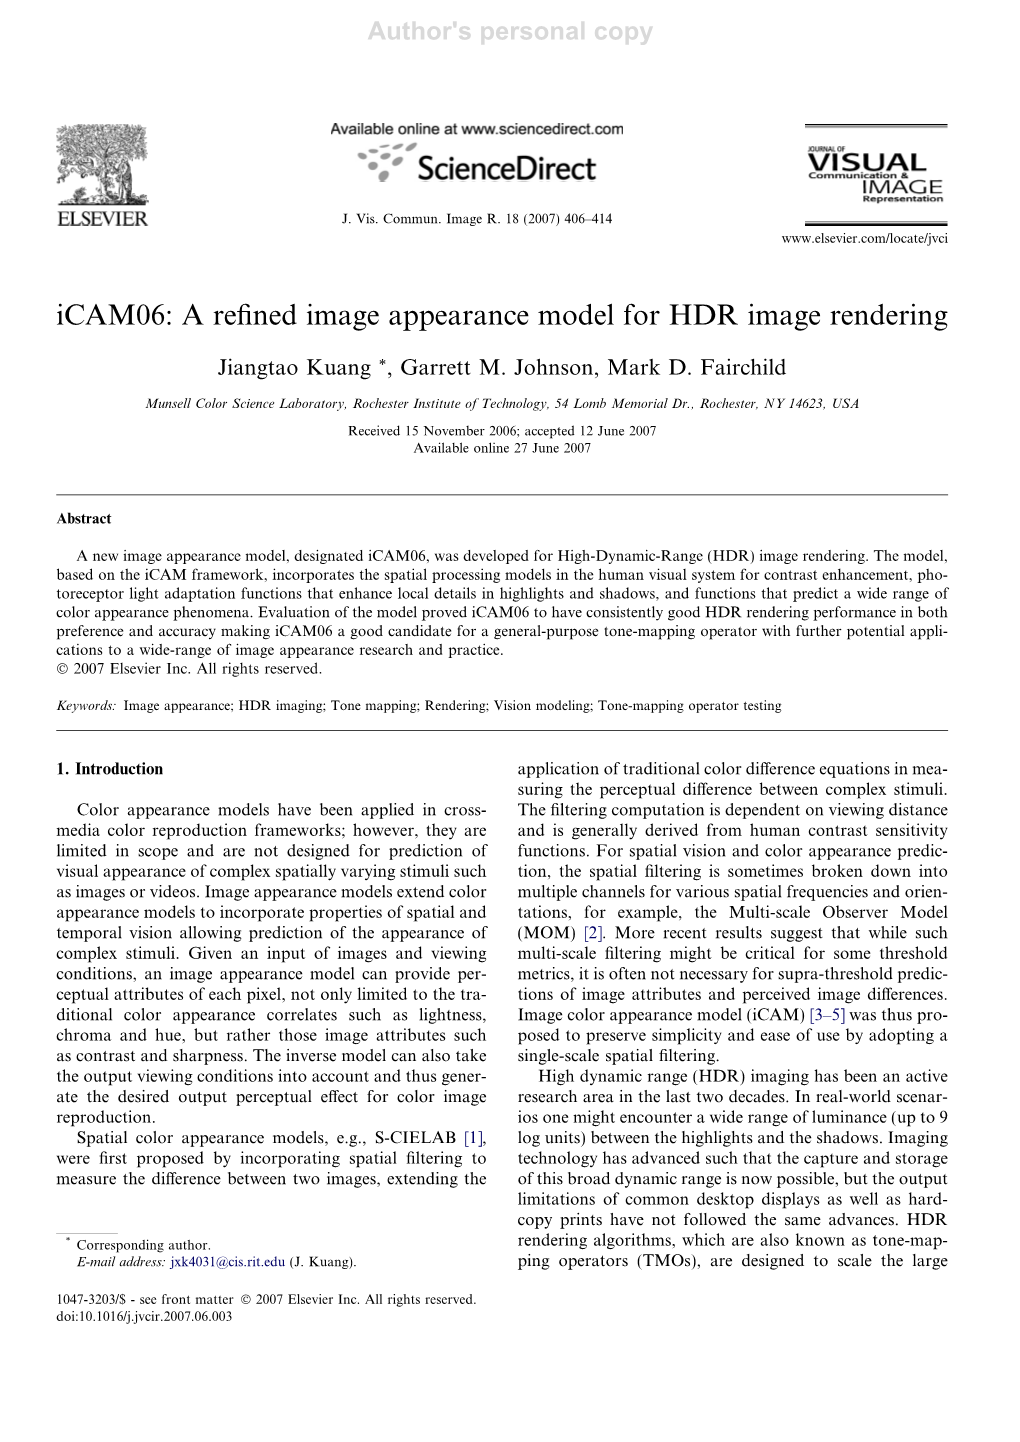 Icam06: a Refined Image Appearance Model for HDR Image Rendering